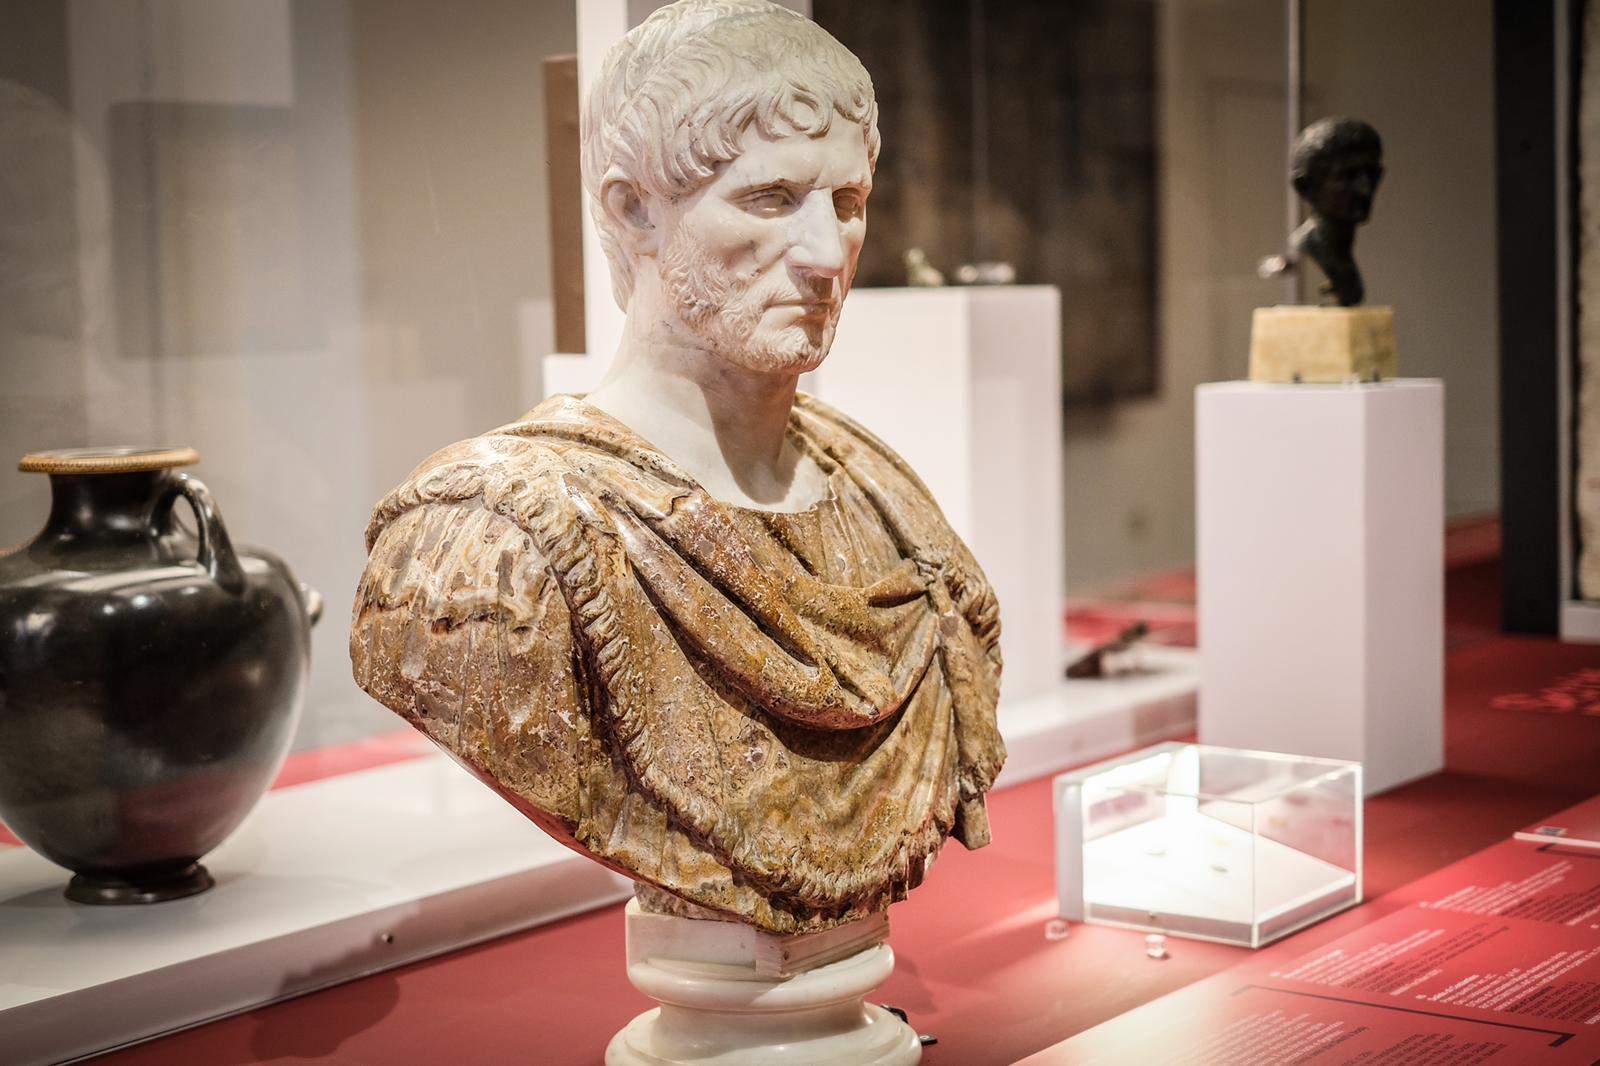 Naples, an exhibition at MANN on Dante's mythological themes in the museum's collection